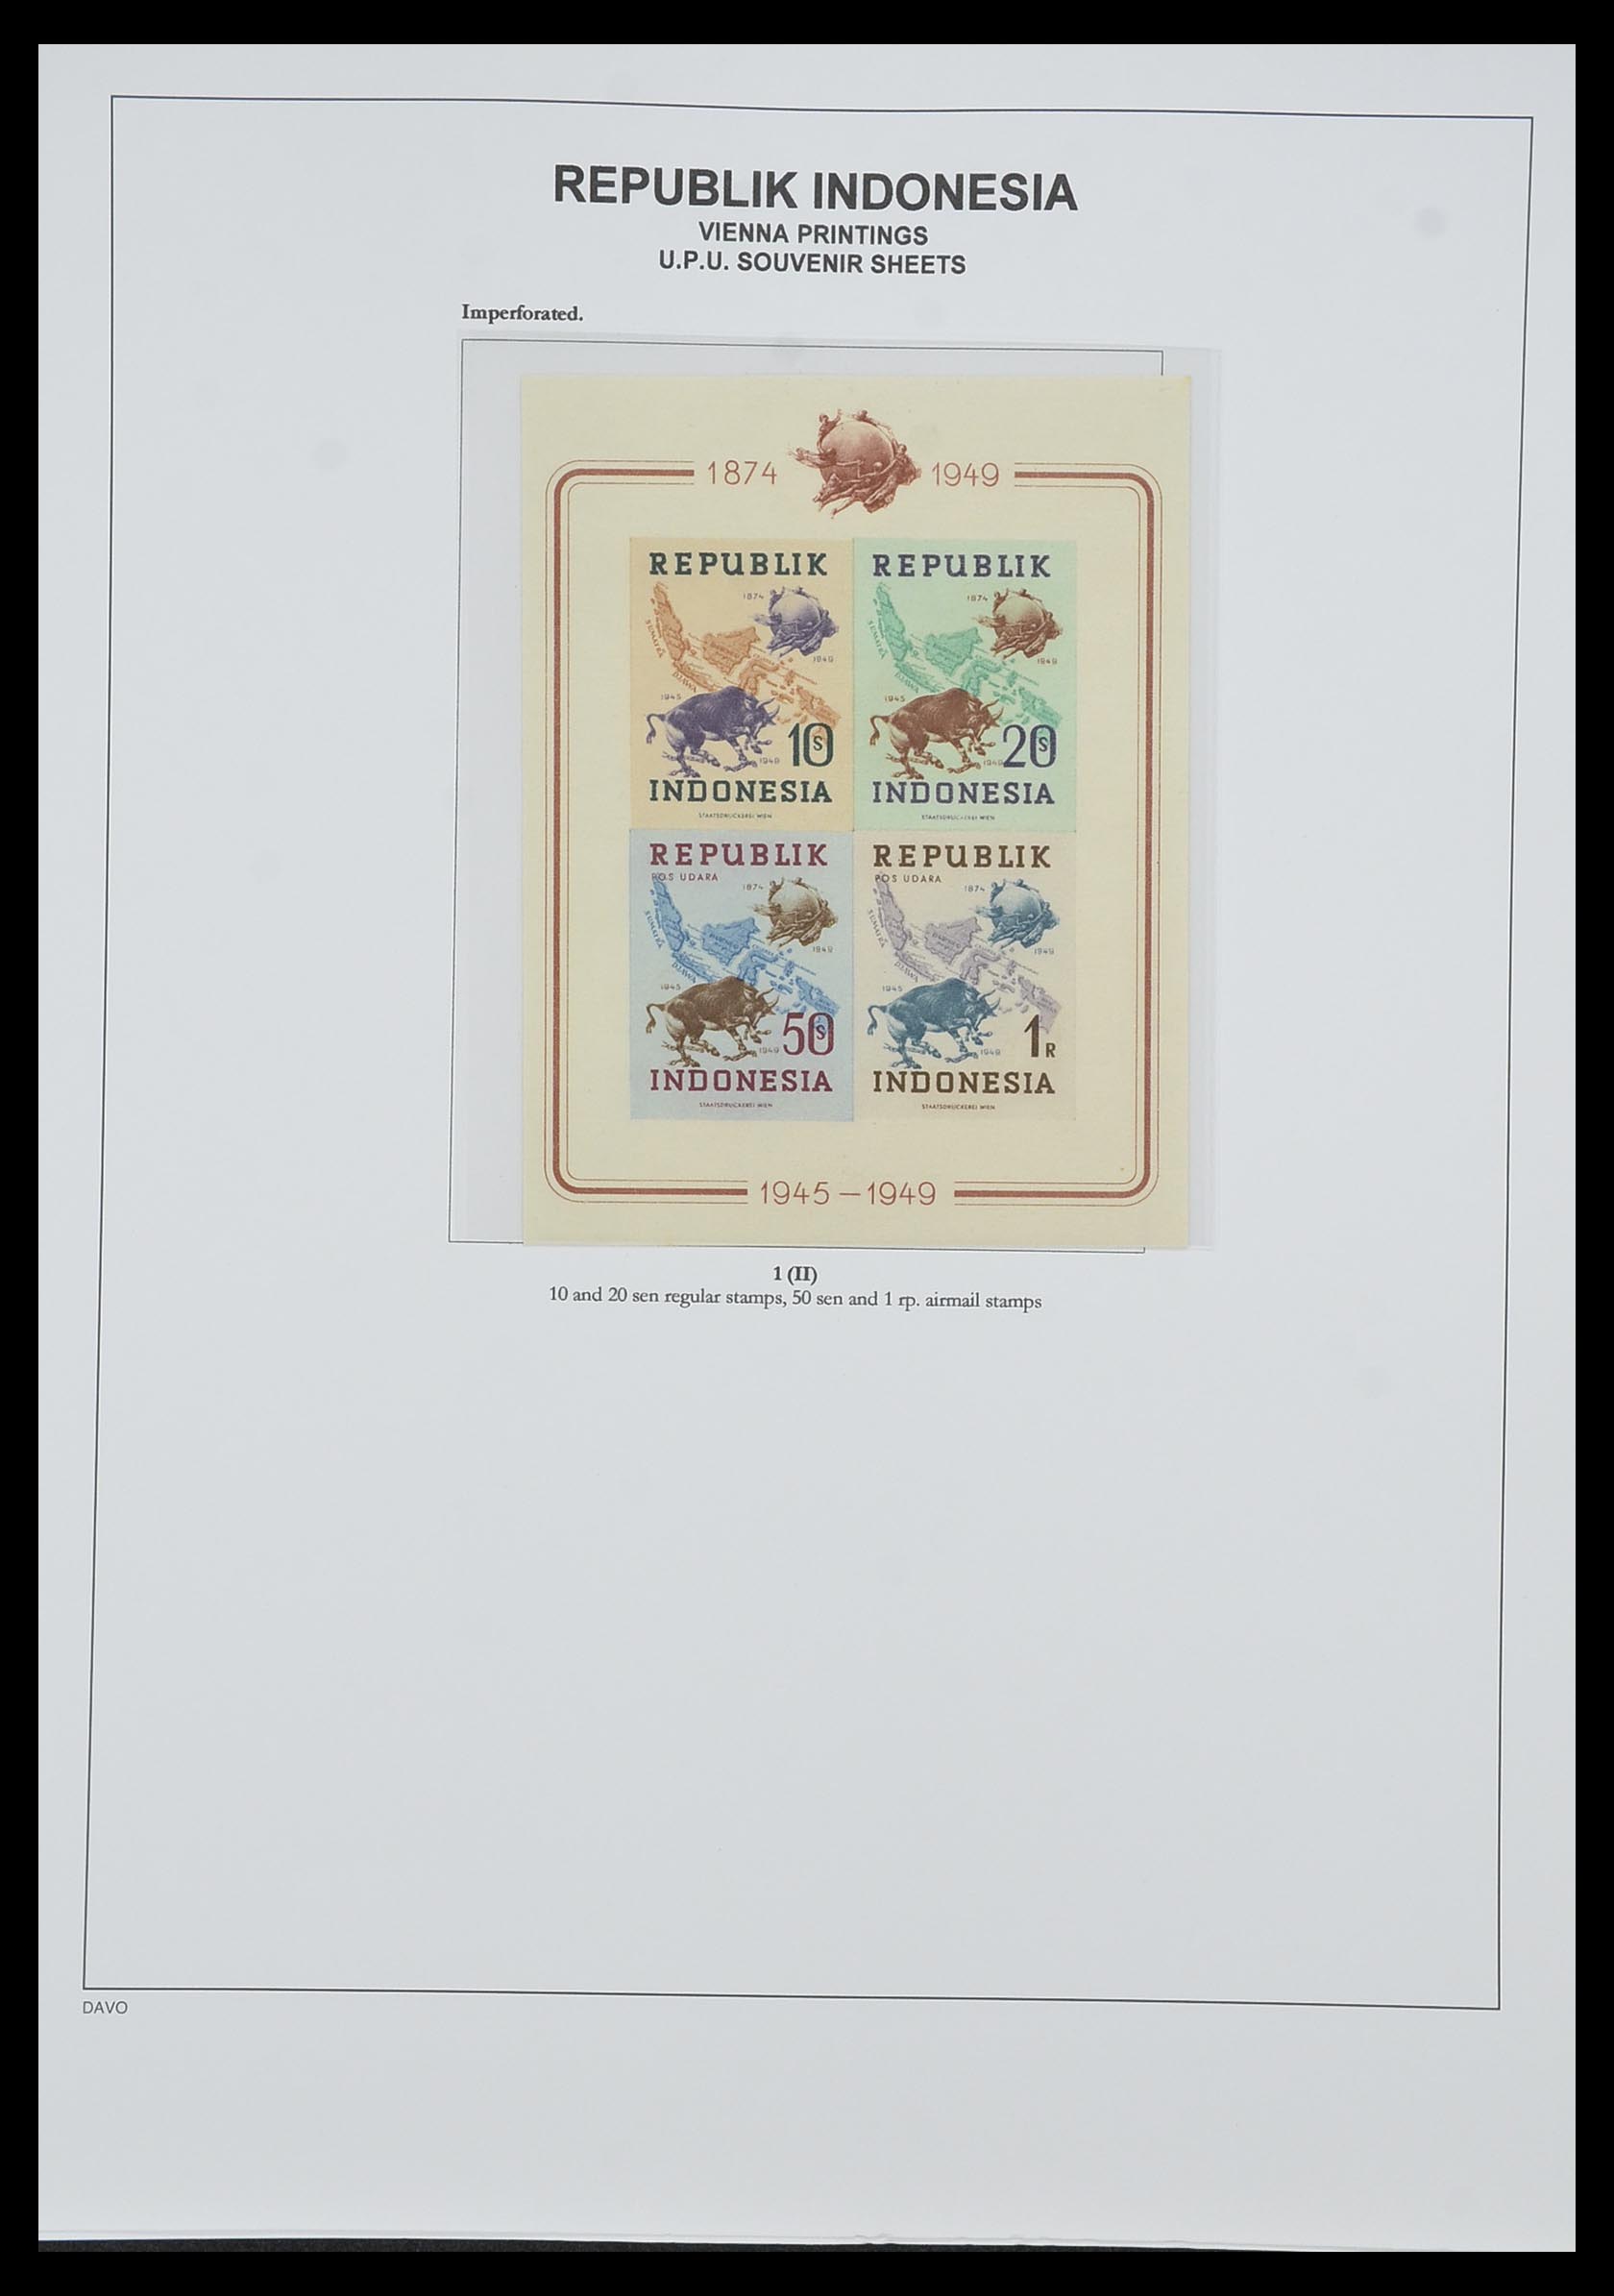 33988 047 - Stamp collection 33988 Vienna printings Indonesia.